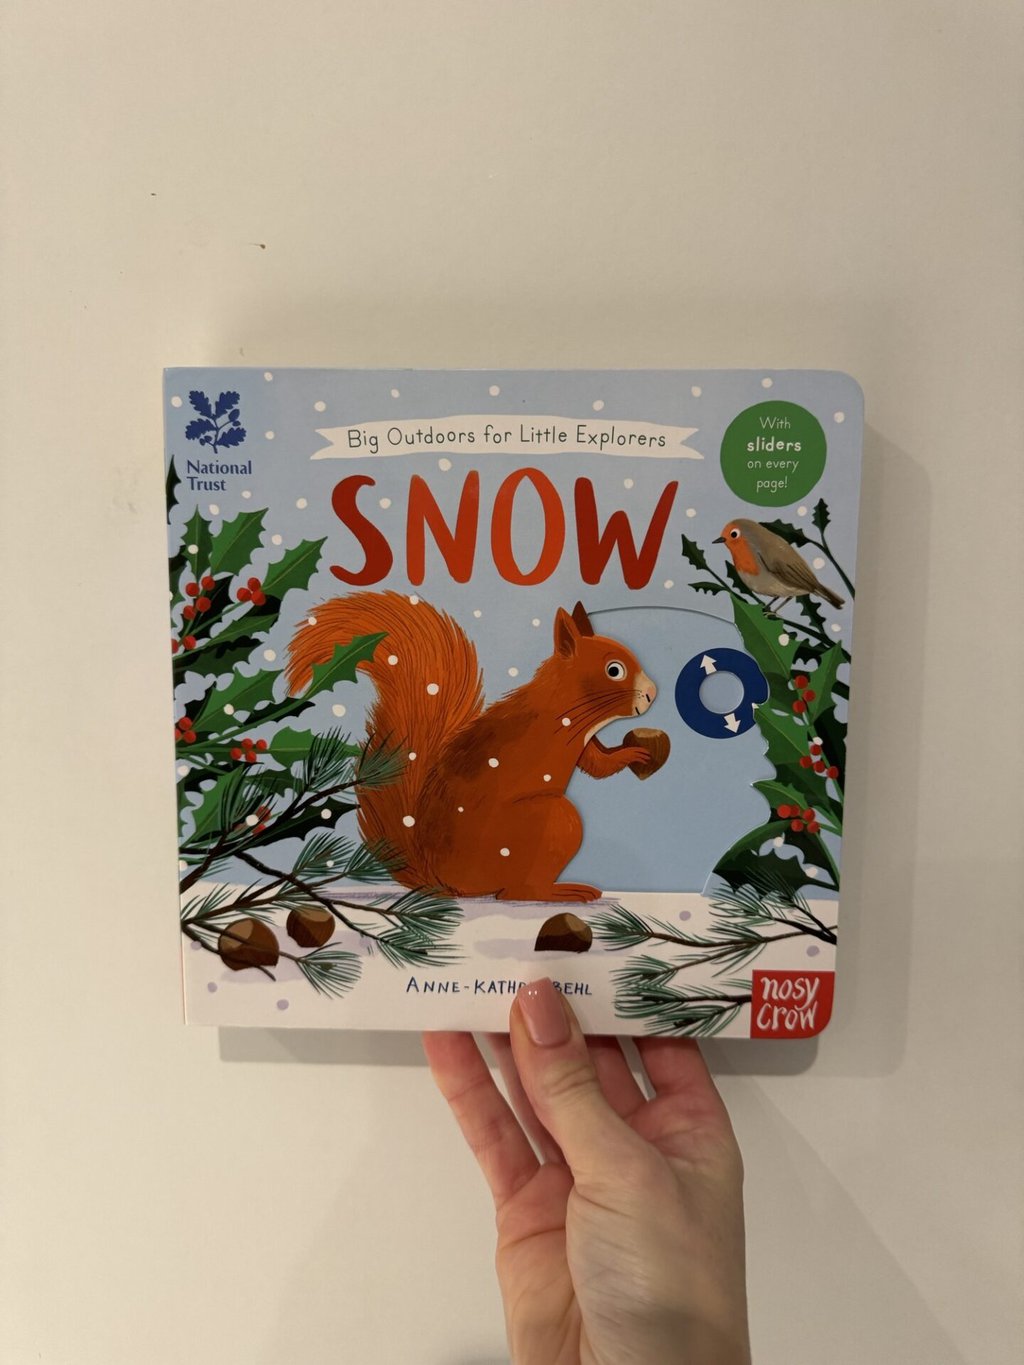 Big Outdoors for Little Explorers: Snow,  Anne-Kathrin Behl (illustrator), Nosy Crow Ltd (publisher)